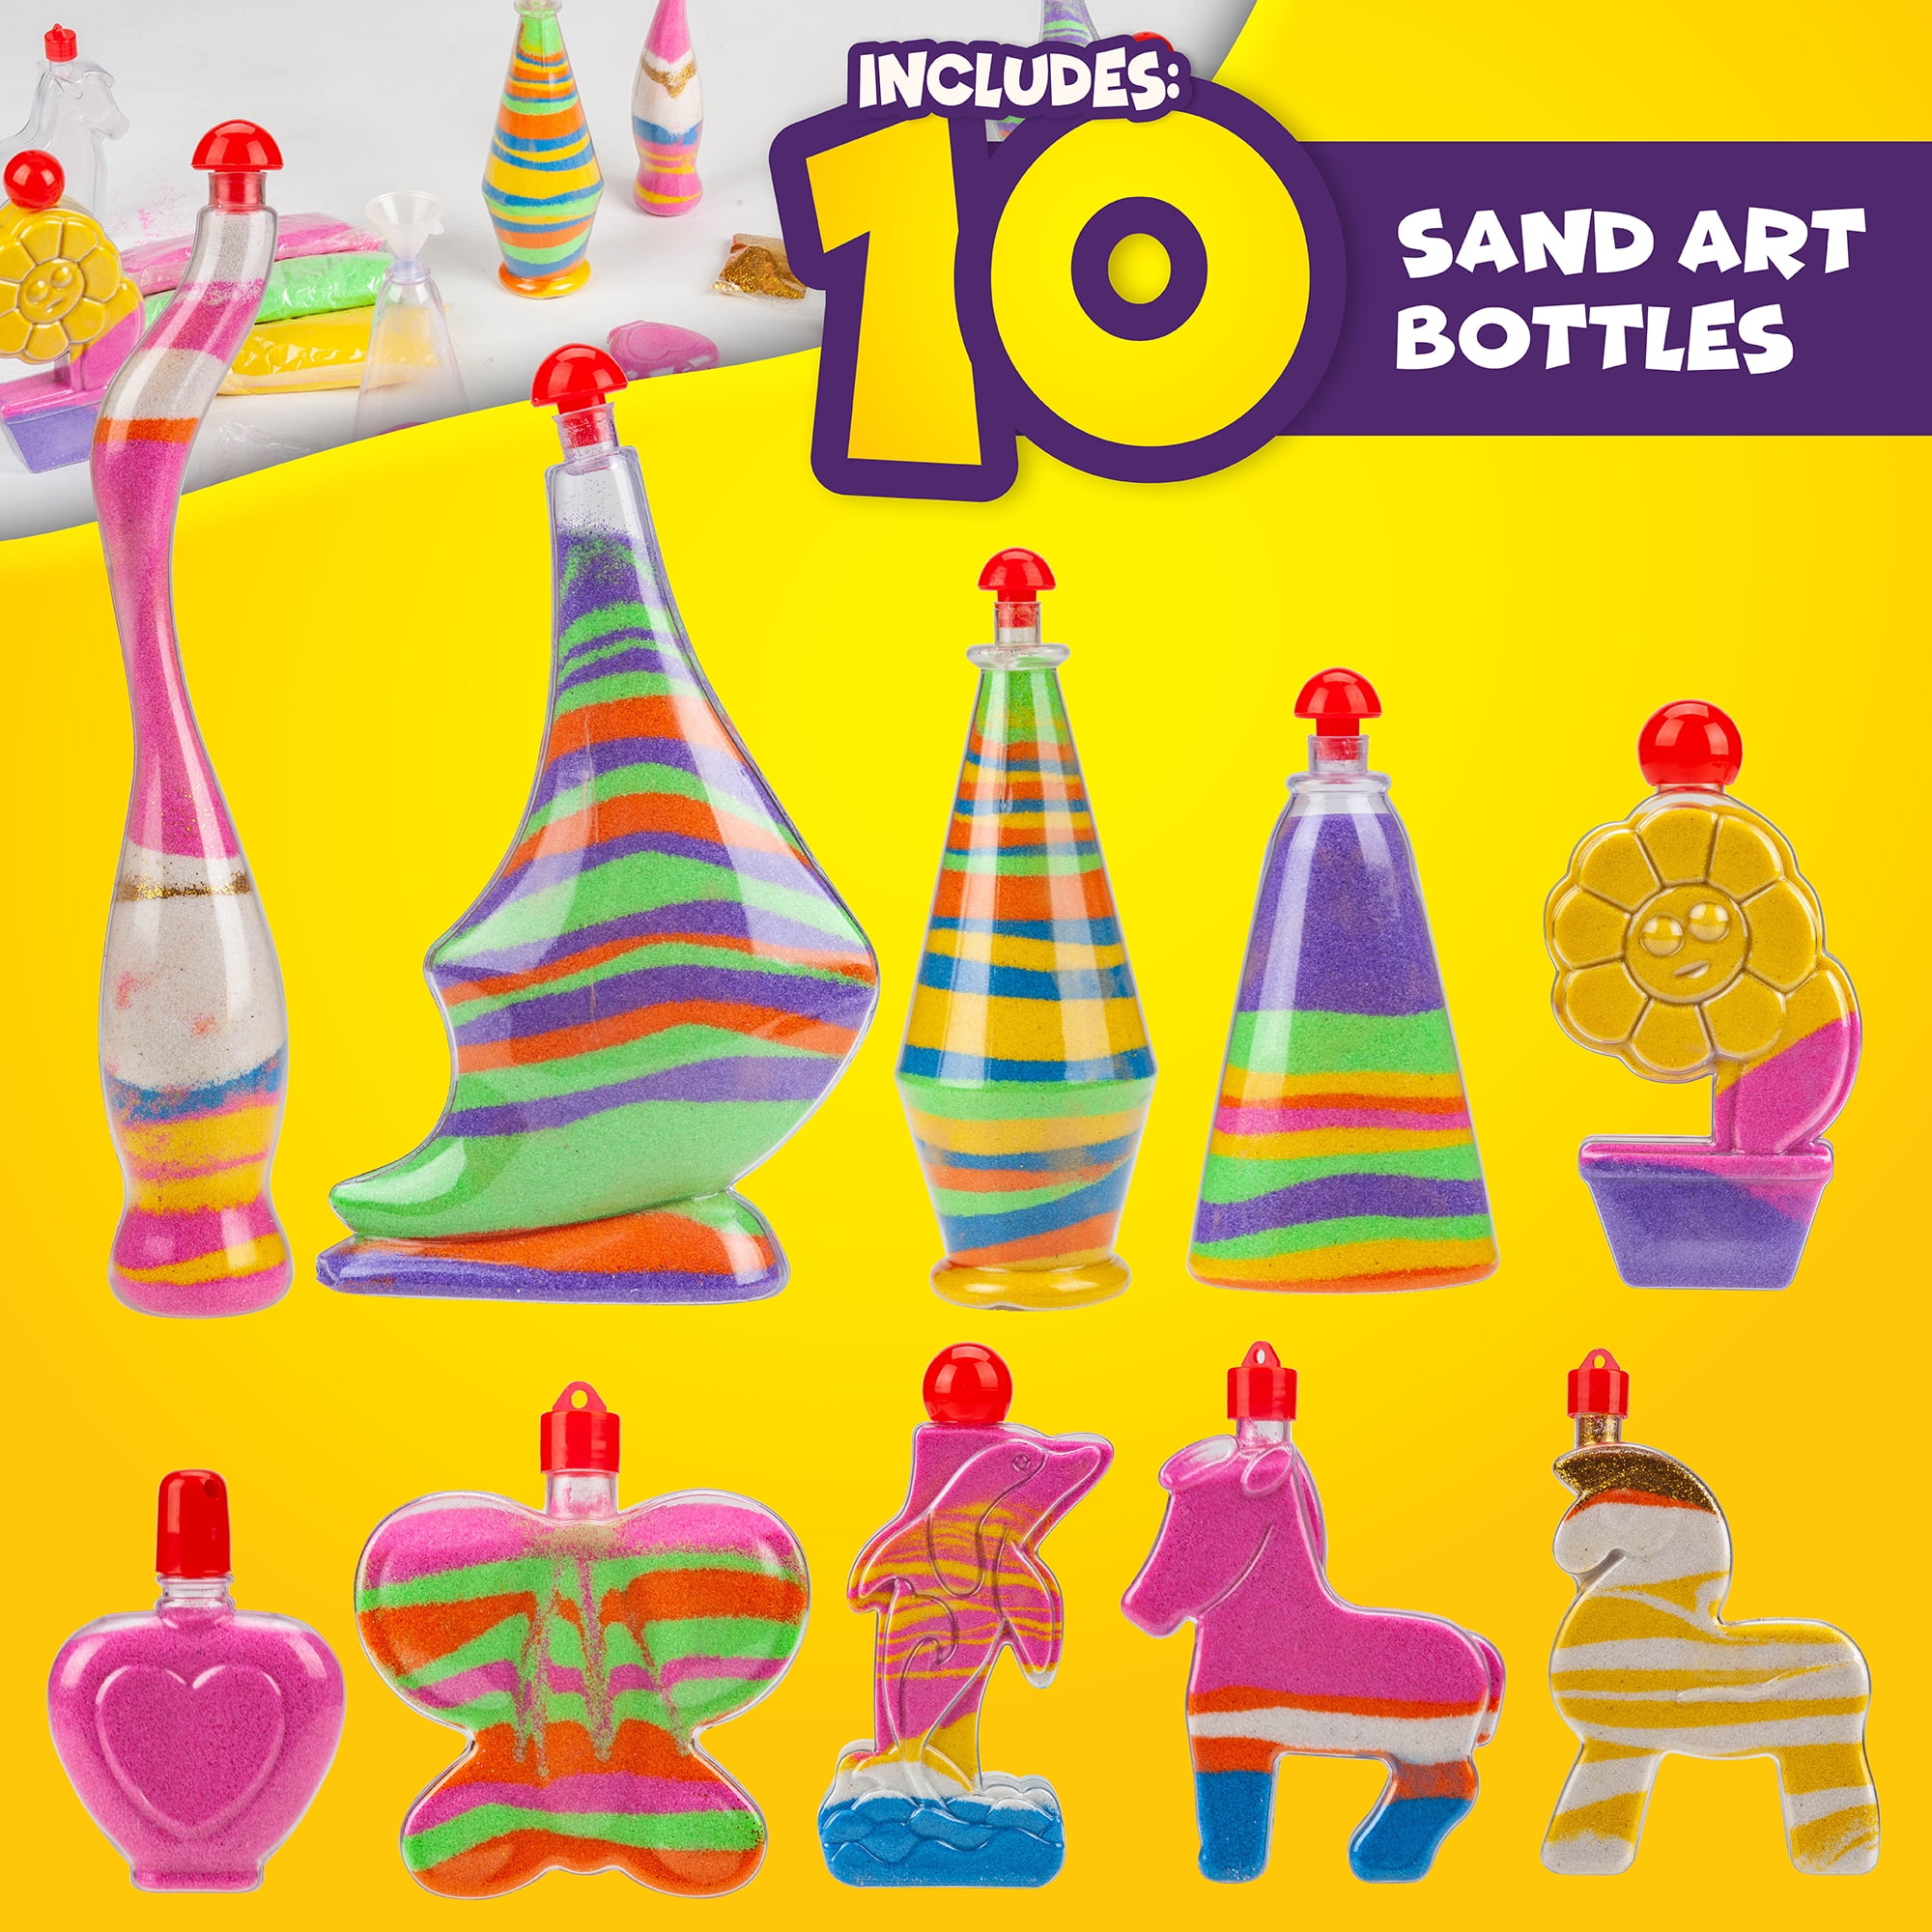 Sand Art Kit Design Tools & Stickers to Decorate w/ Instructions. Colored Play Sand Art Kits for Kids Glitter and Glow In The Dark Colored Kids Sand Creative DIY Activity with Fun Bottle Shapes 